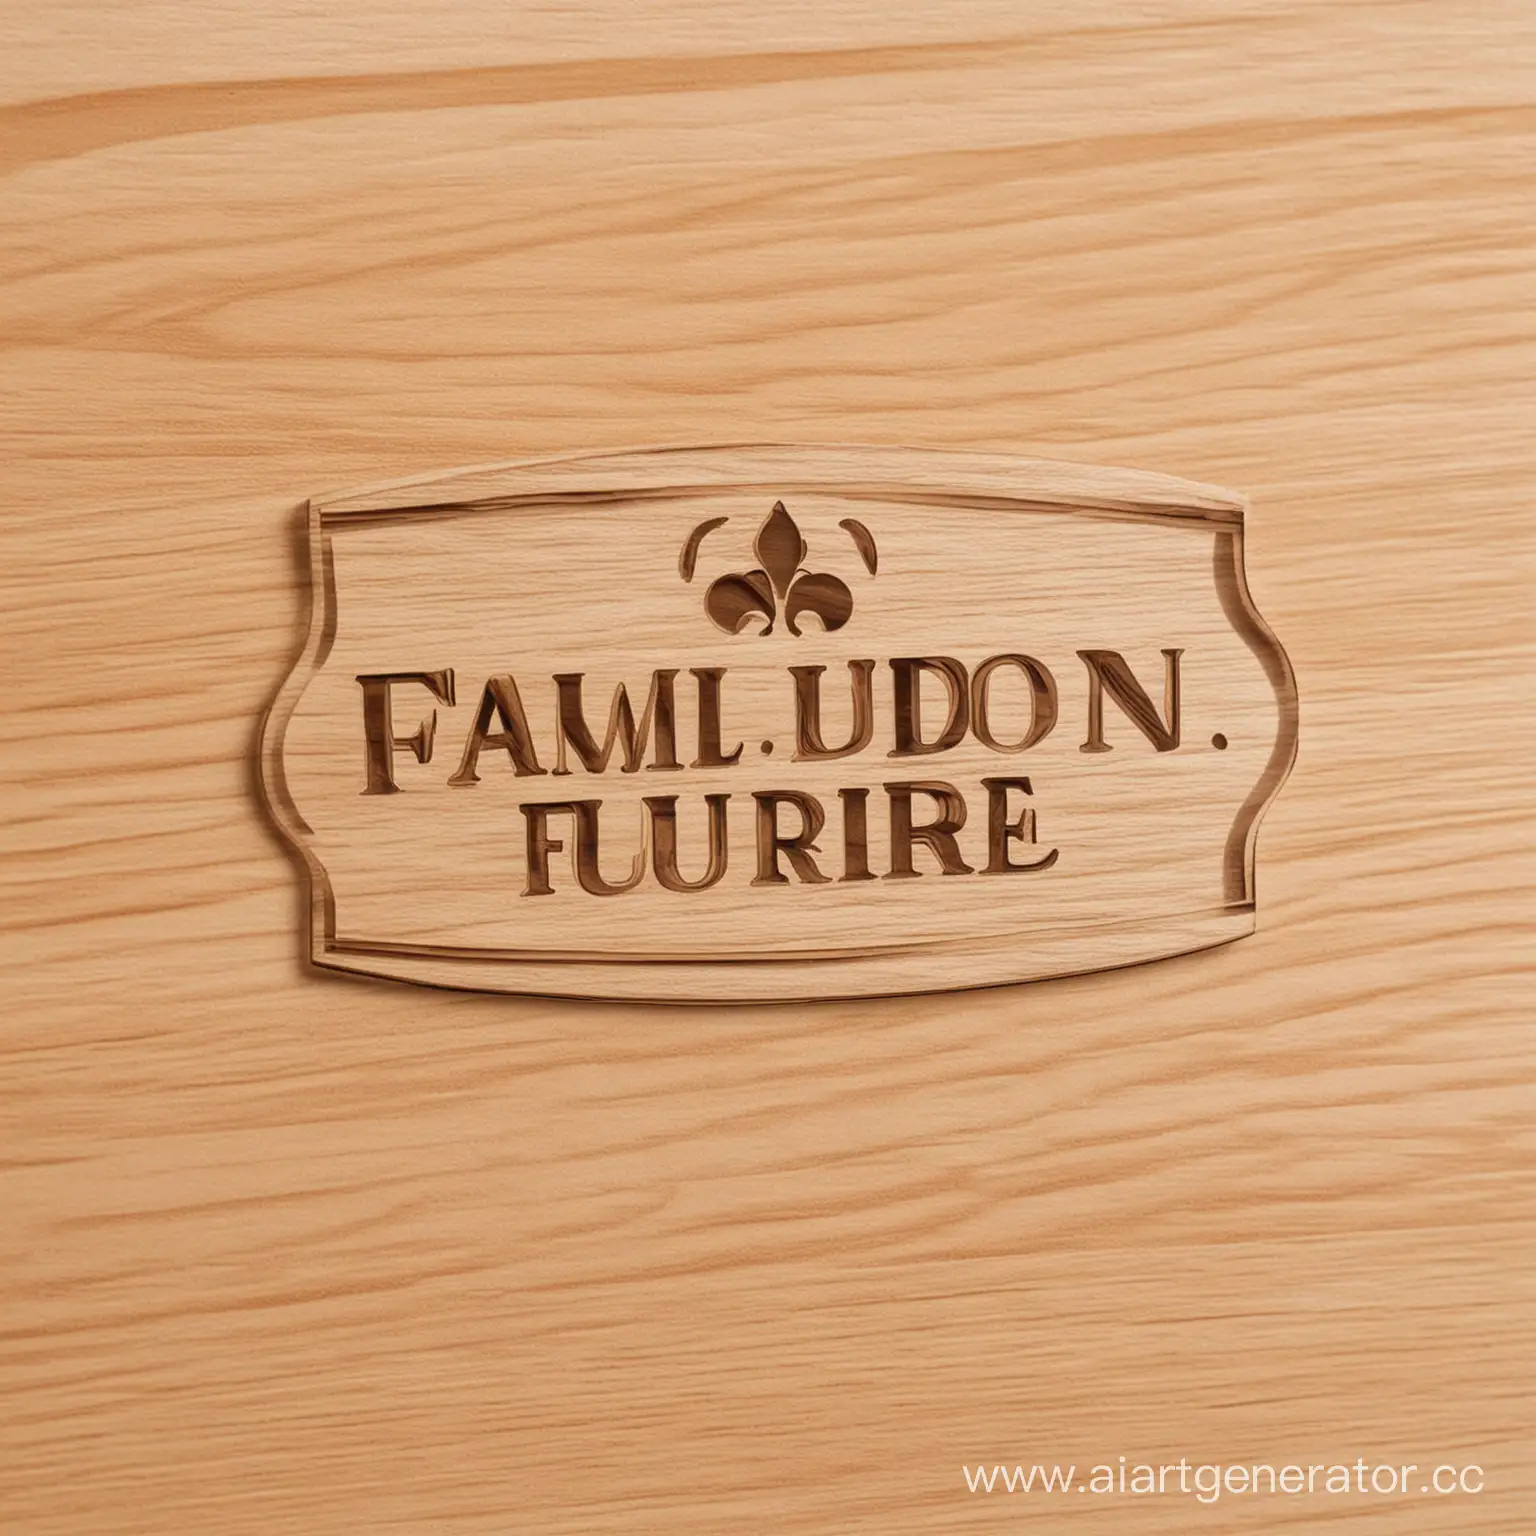 Elegant-Wooden-Furniture-Company-Label-Crafted-from-Natural-Wood